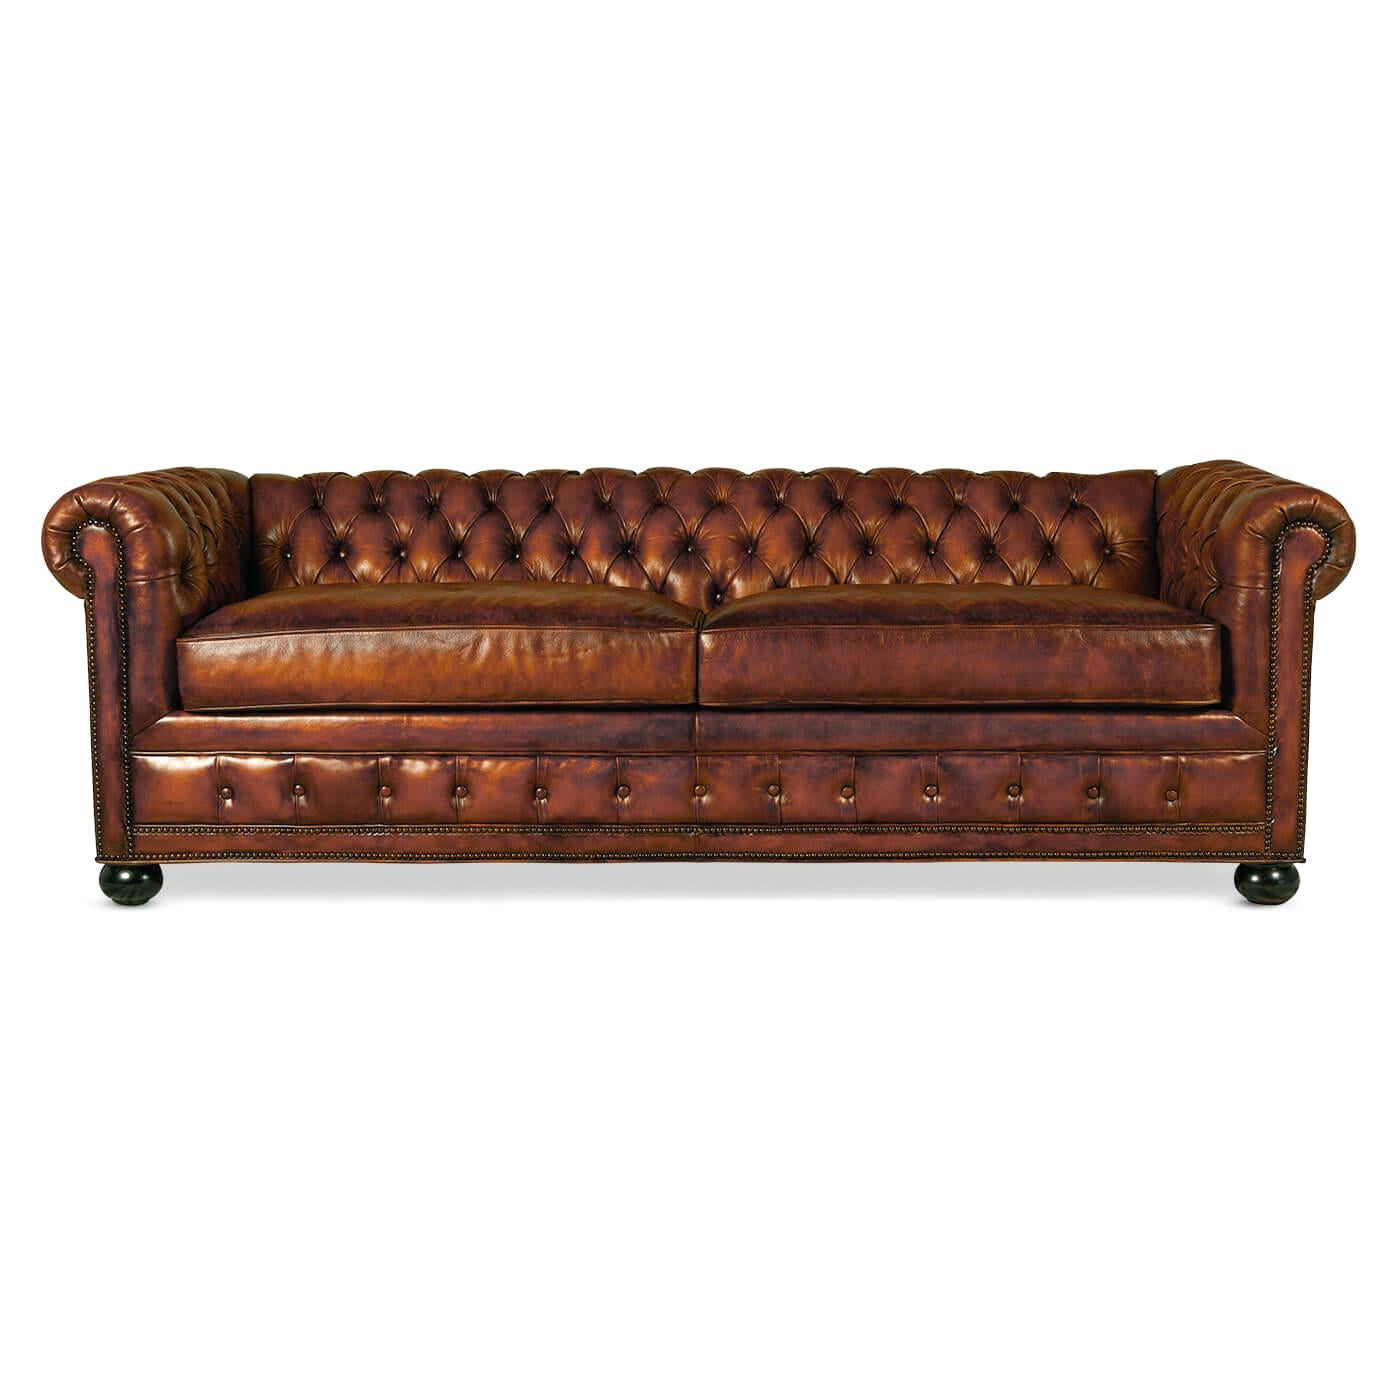 A Classic antiqued Chesterfield leather sofa. This beautiful hand-rubbed and antiqued leather Chesterfield sofa is beautifully crafted and artistically antiqued to look and feel like a vintage leather sofa.

This top grain leather Chesterfield